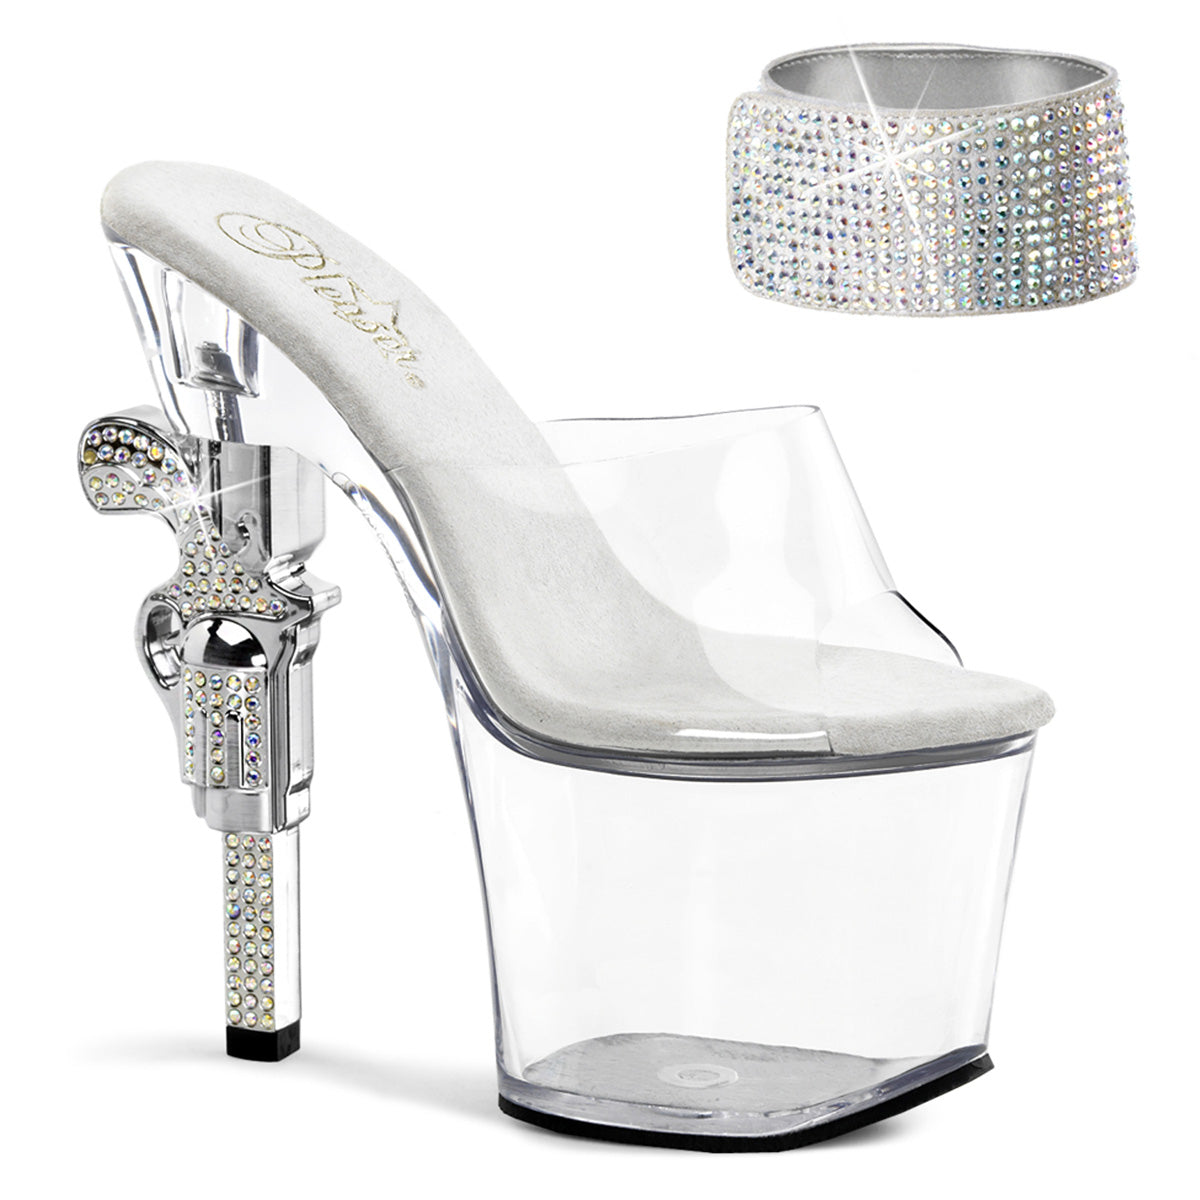 REVOLVER-712 Pleaser 7" Heel Clear Pole Dancing Platforms-Pleaser- Sexy Shoes